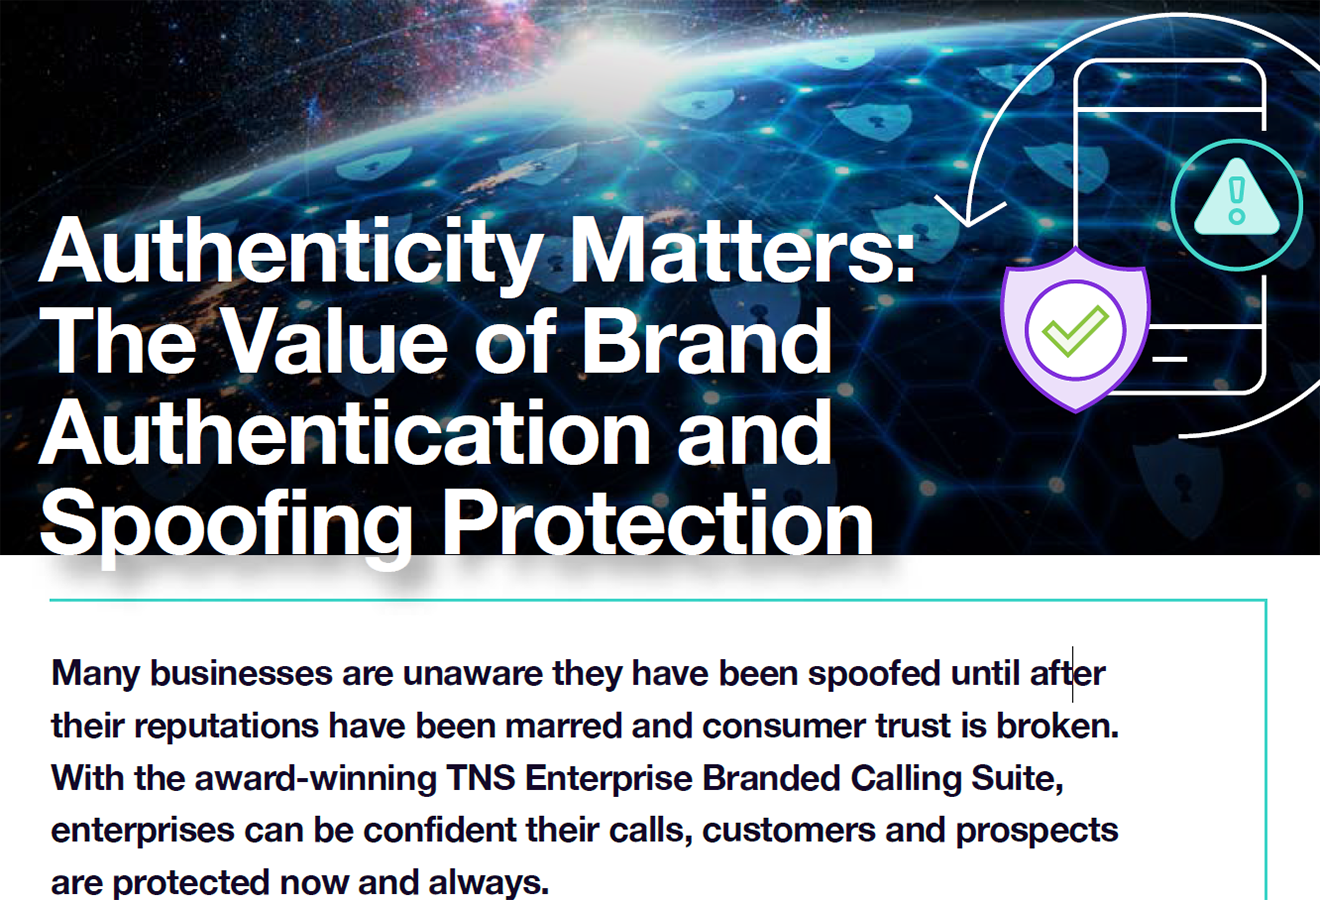 The Value of Brand Authentication and Spoofing Protection